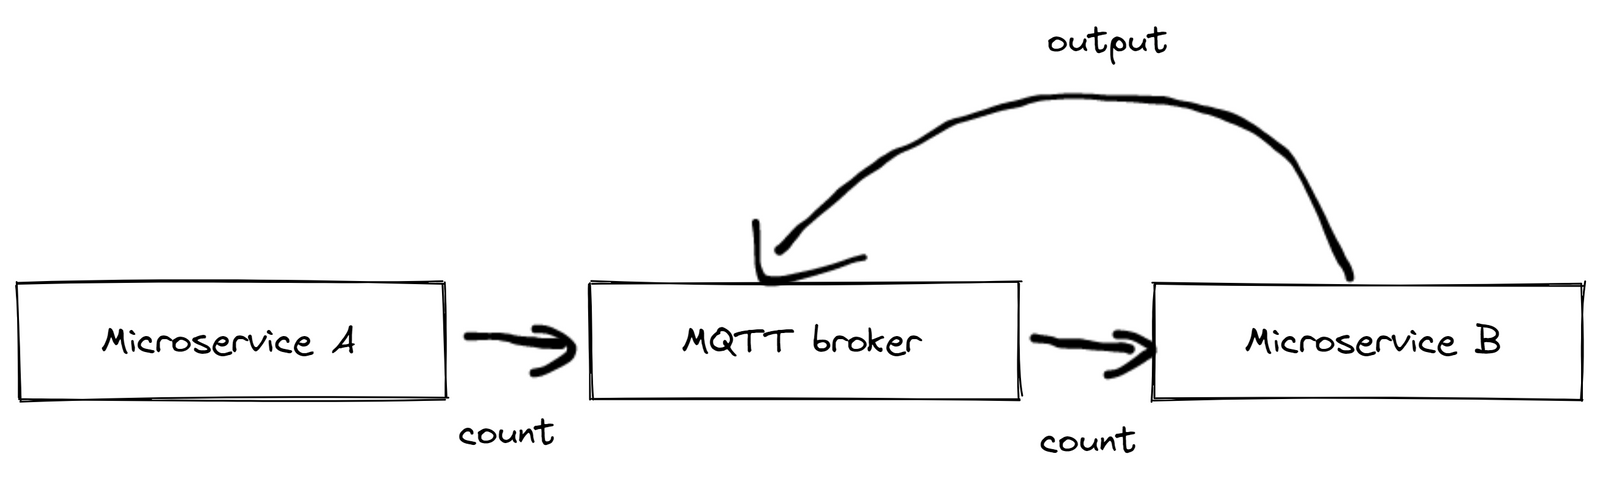 workflow of the counting process: A sends a count message to the MQTT broker, B consumes the message and delivers an output  